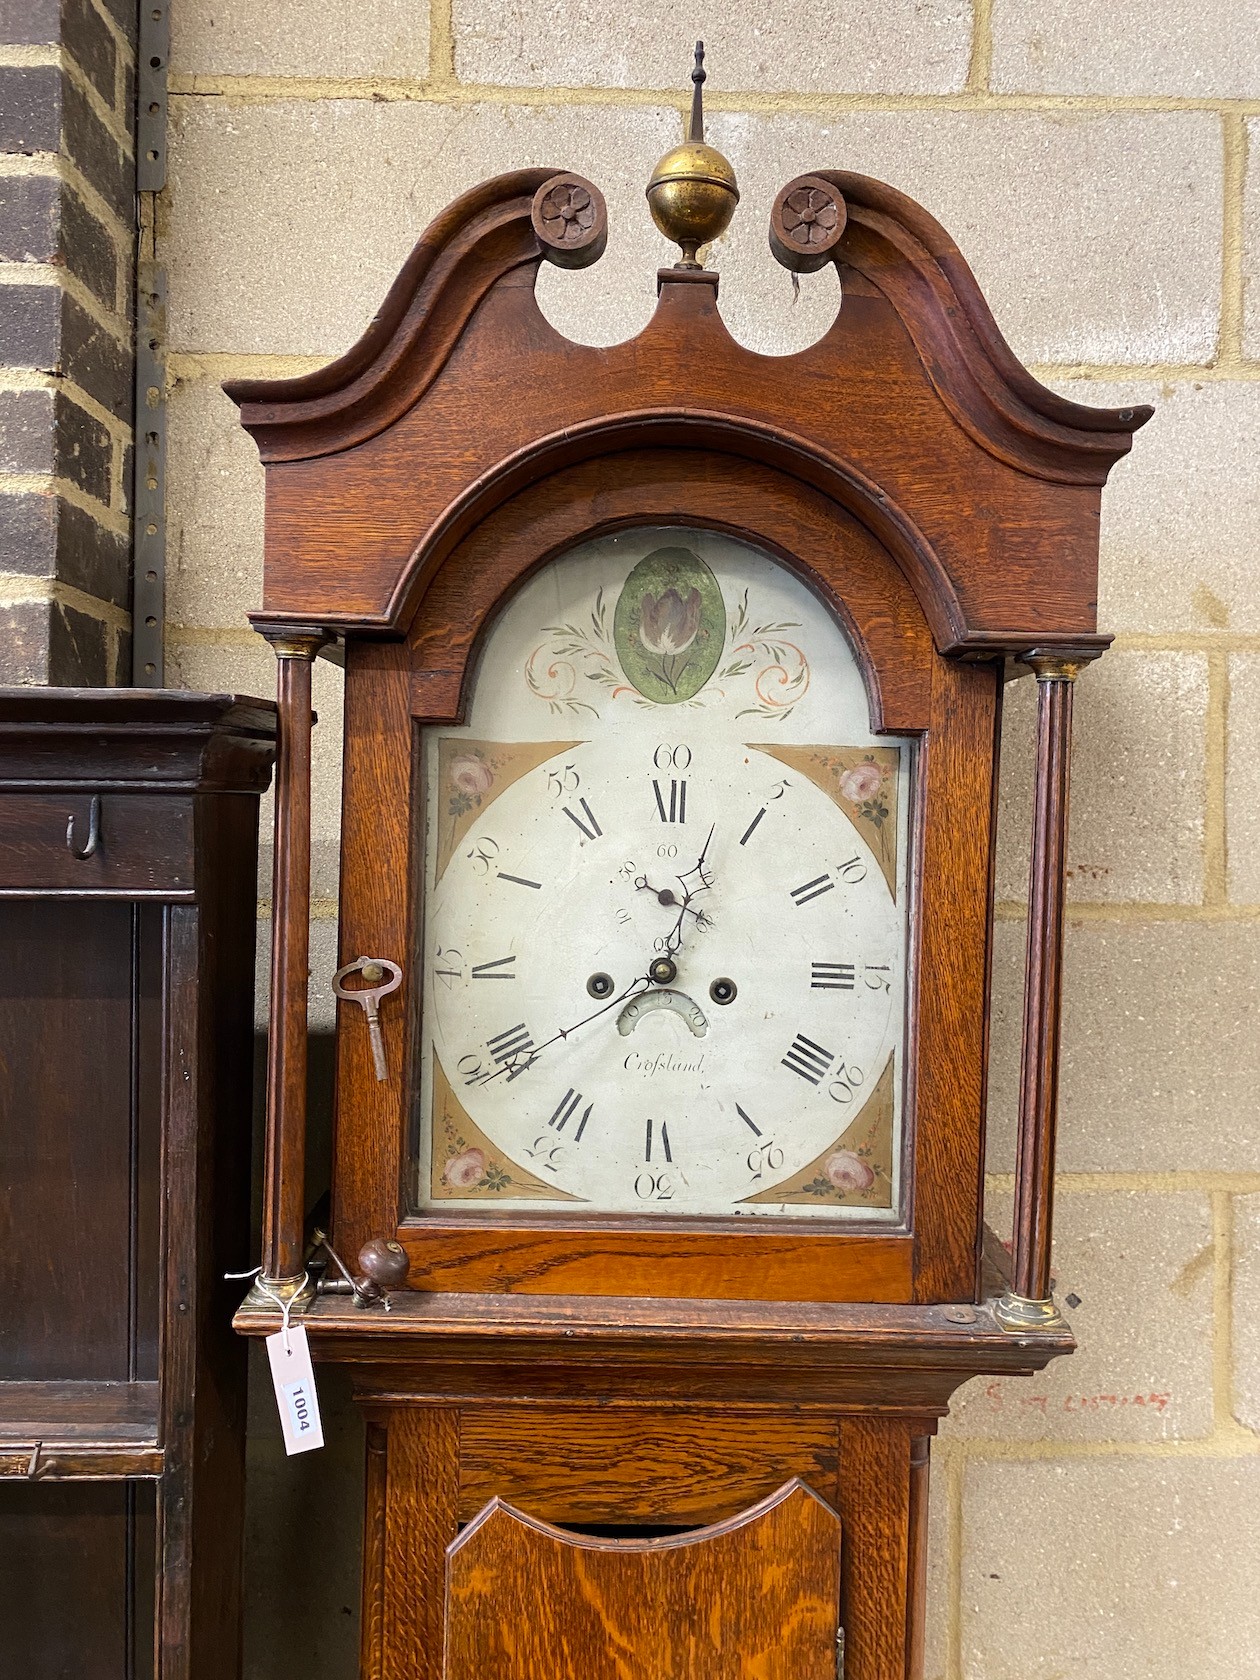 An early 19th century oak 8 day longcase clock, fusee movement, dial marked Crossland, height 236cm